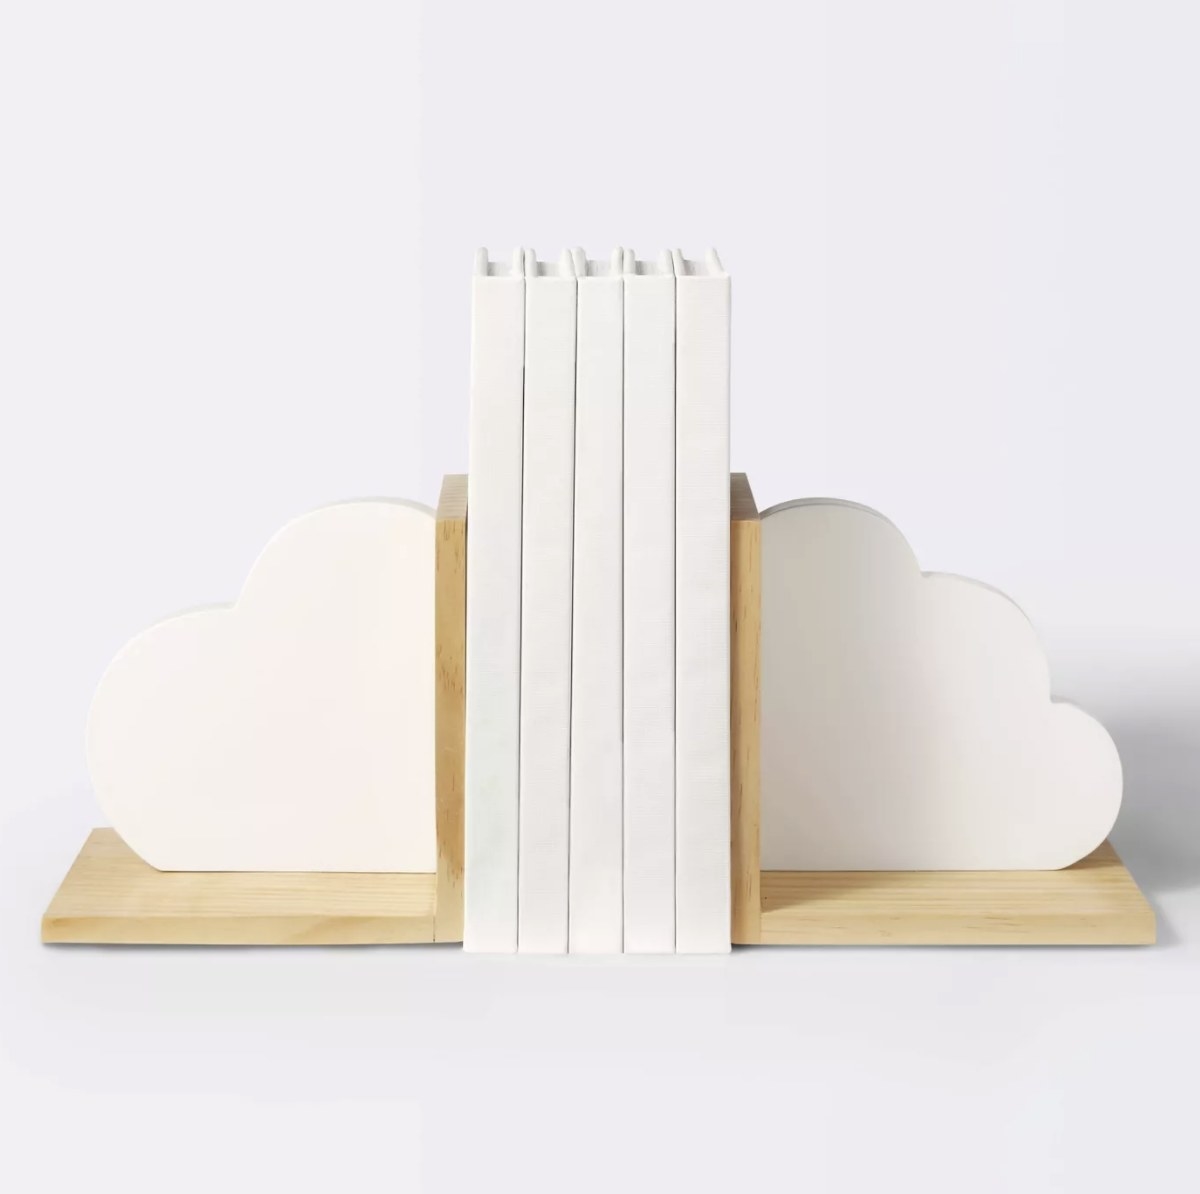 The white cloud bookends have a light wood base and are supporting five white books